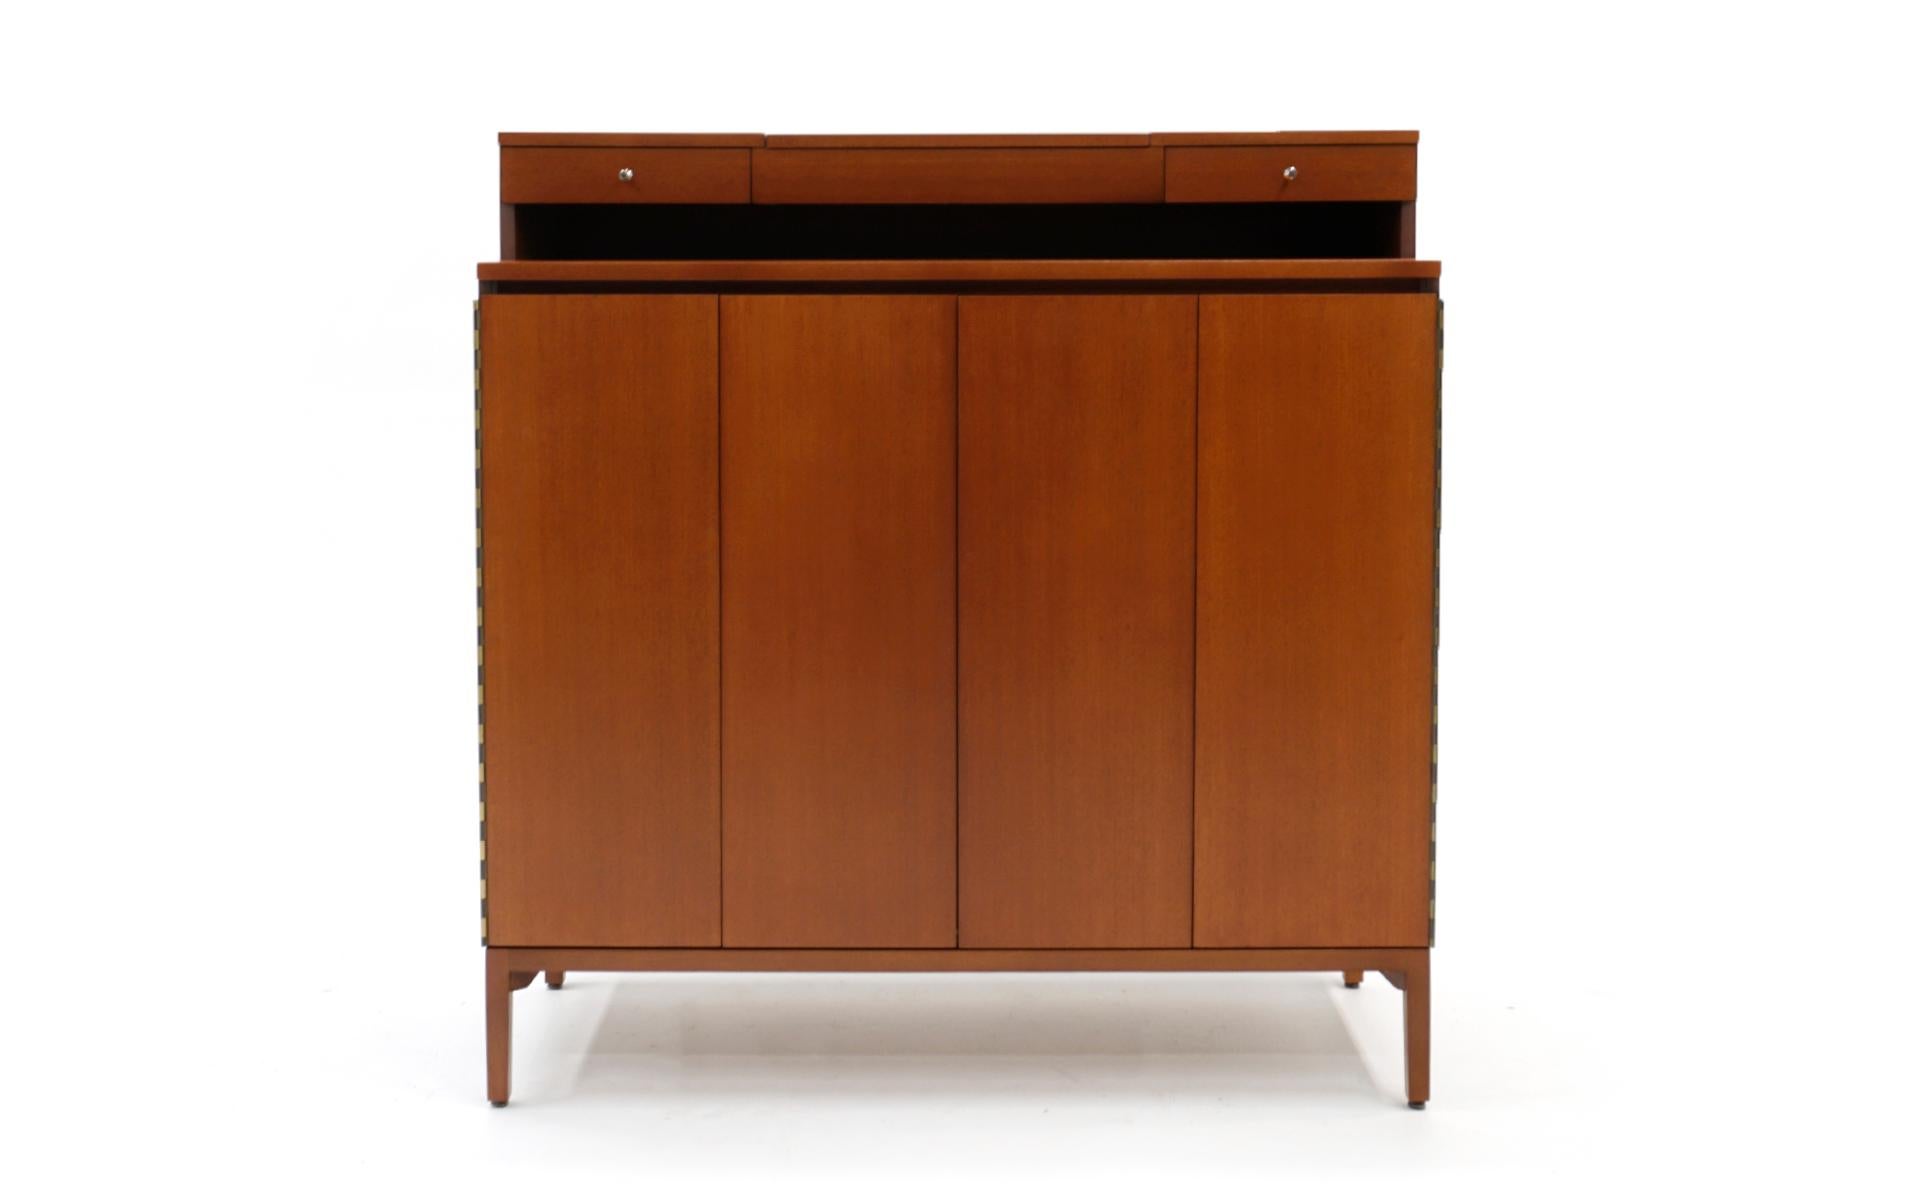 Tall chest / dresser designed by Paul McCobb for the Irwin collection produced by Calvin. Bi-fold doors reveal 18 slides out shelves on one side and 5 drawers of various sizes on the other. The upper portion has built in jewelry drawers and a lift